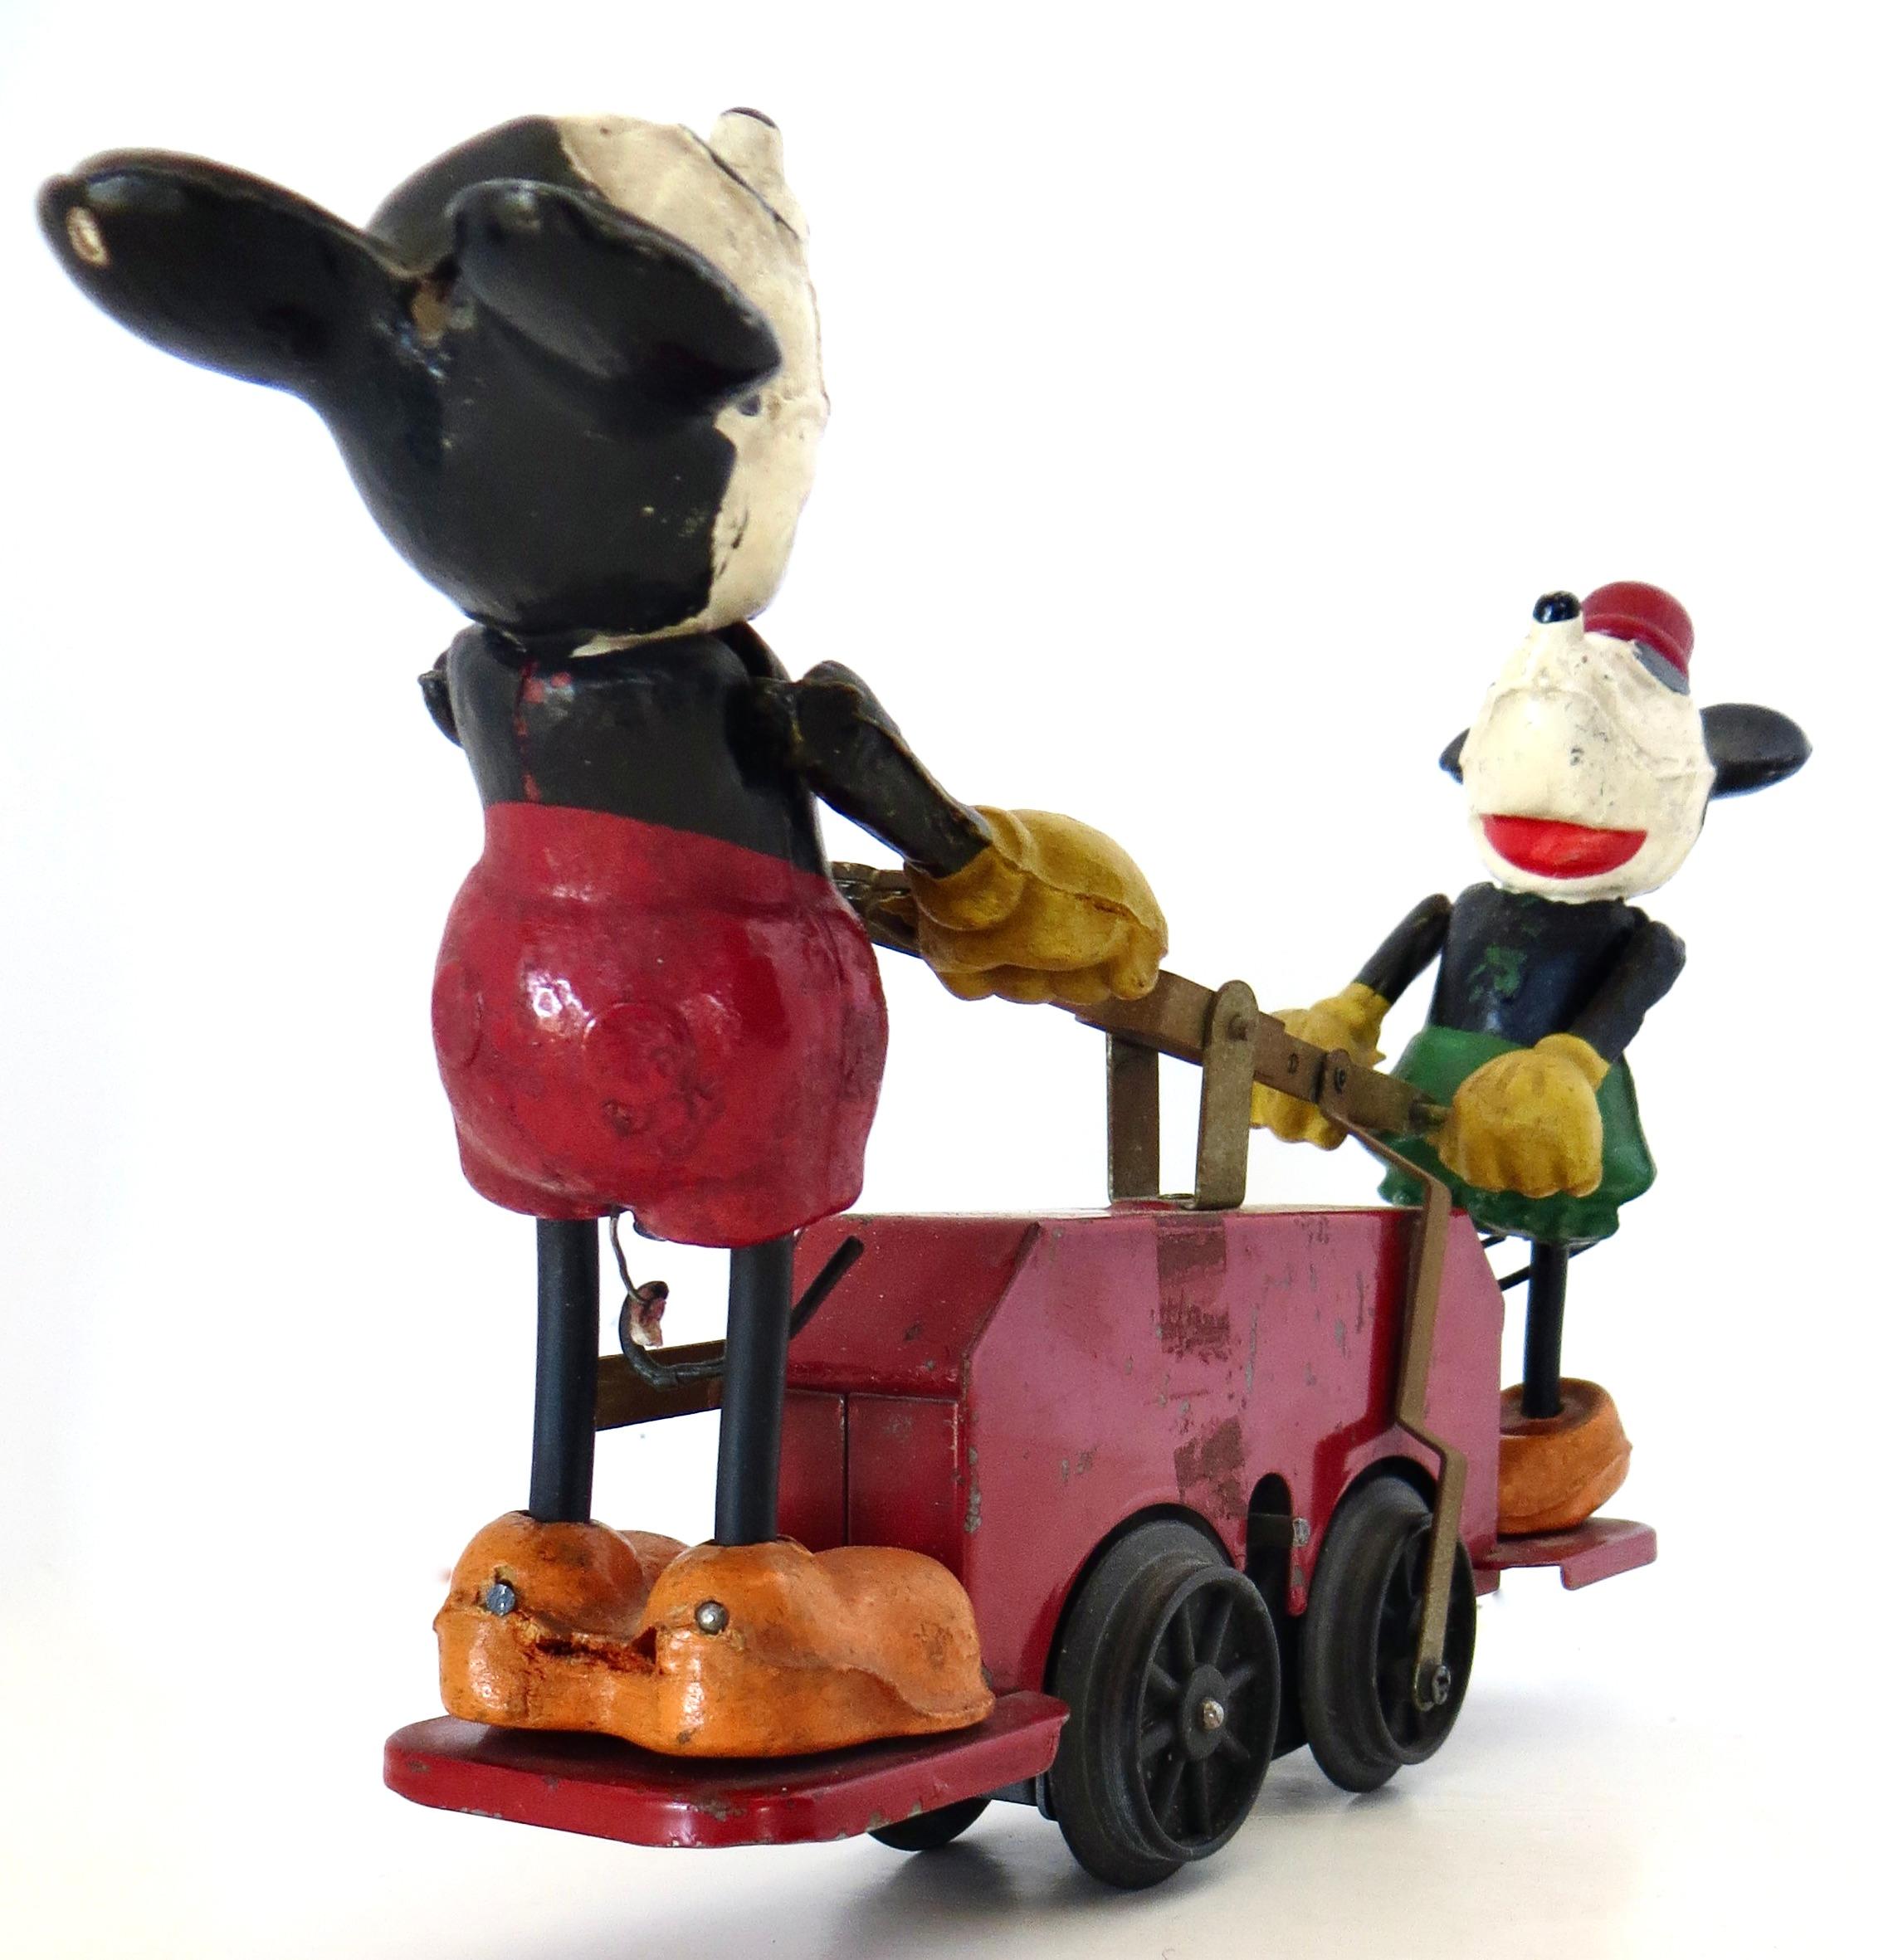 Hand-Crafted Antique Mickey Mouse & Minnie Mouse Train Hand Car by Disney & Lionel Circa 1934 For Sale